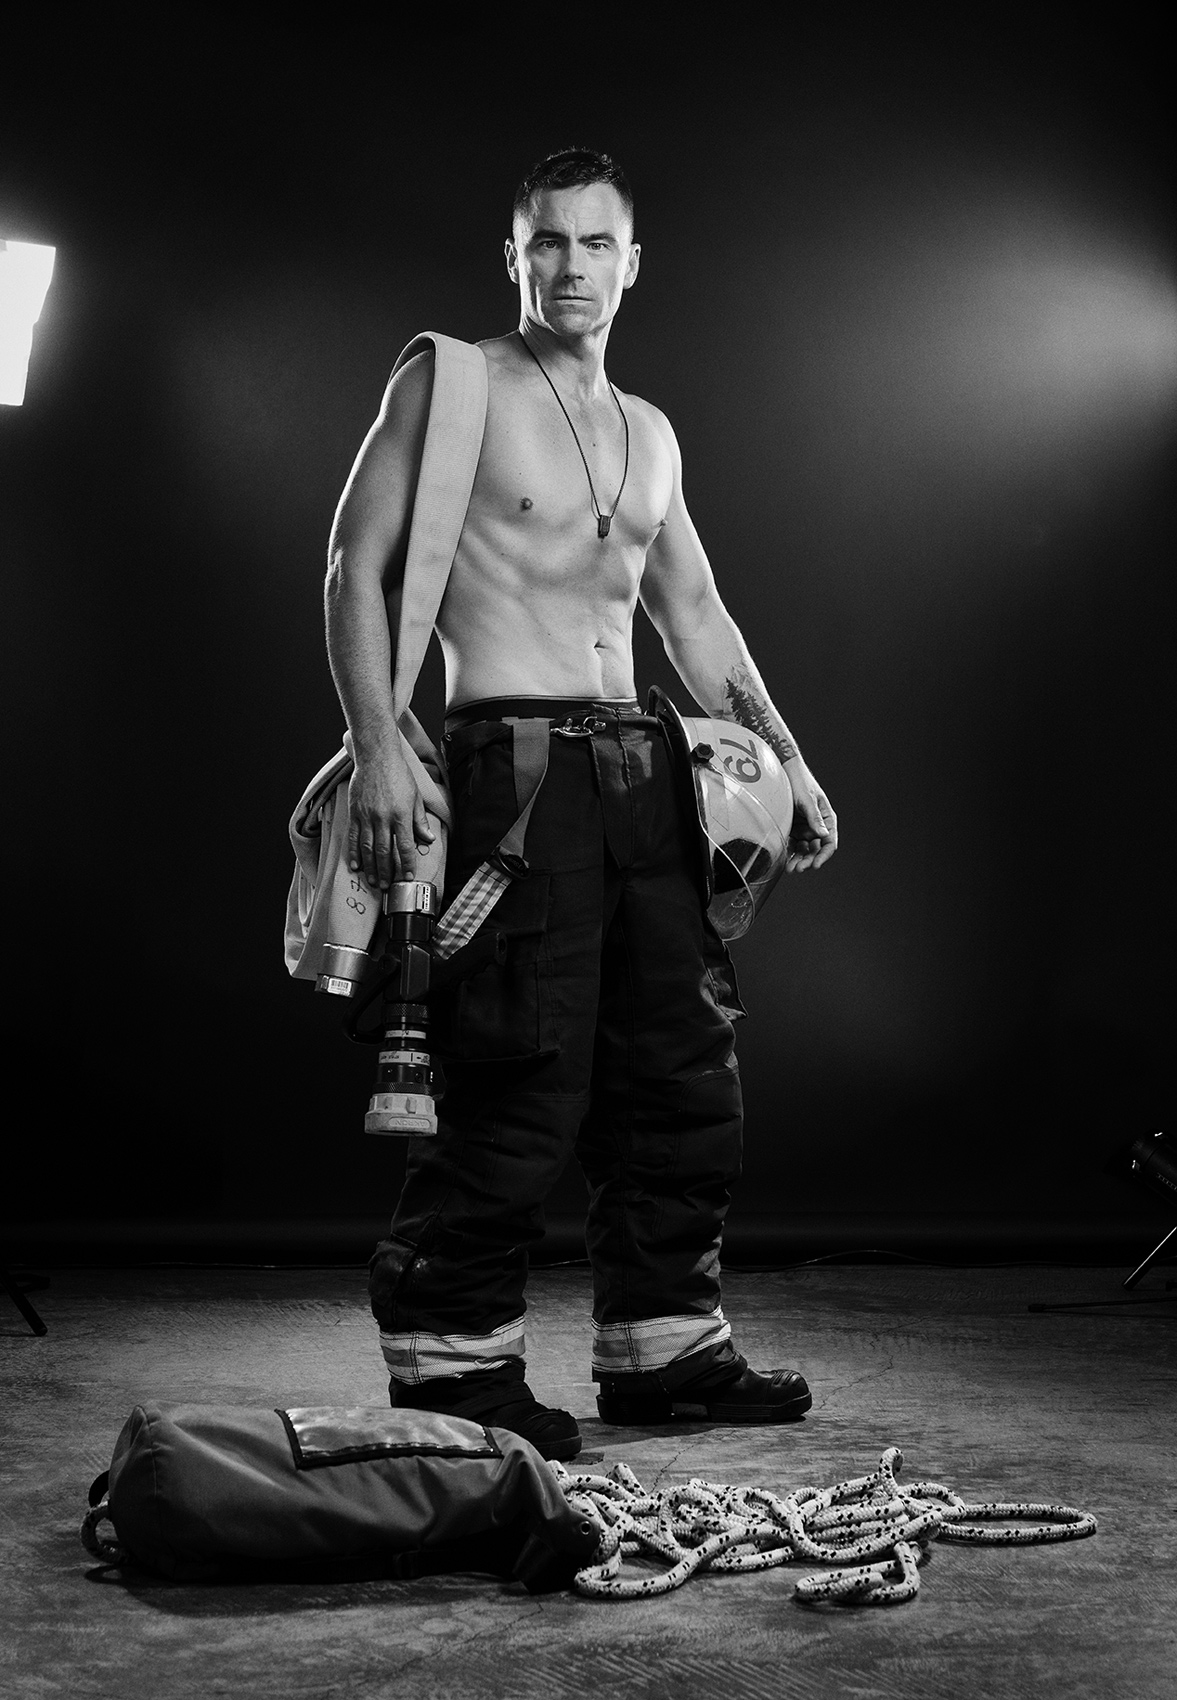 HOF-Hall-of-Flame-Calender-Erich-Saide-Vancouver-Portrait-Photographer-Firefighters-First-Responders-Hot-Hero-March-Charles